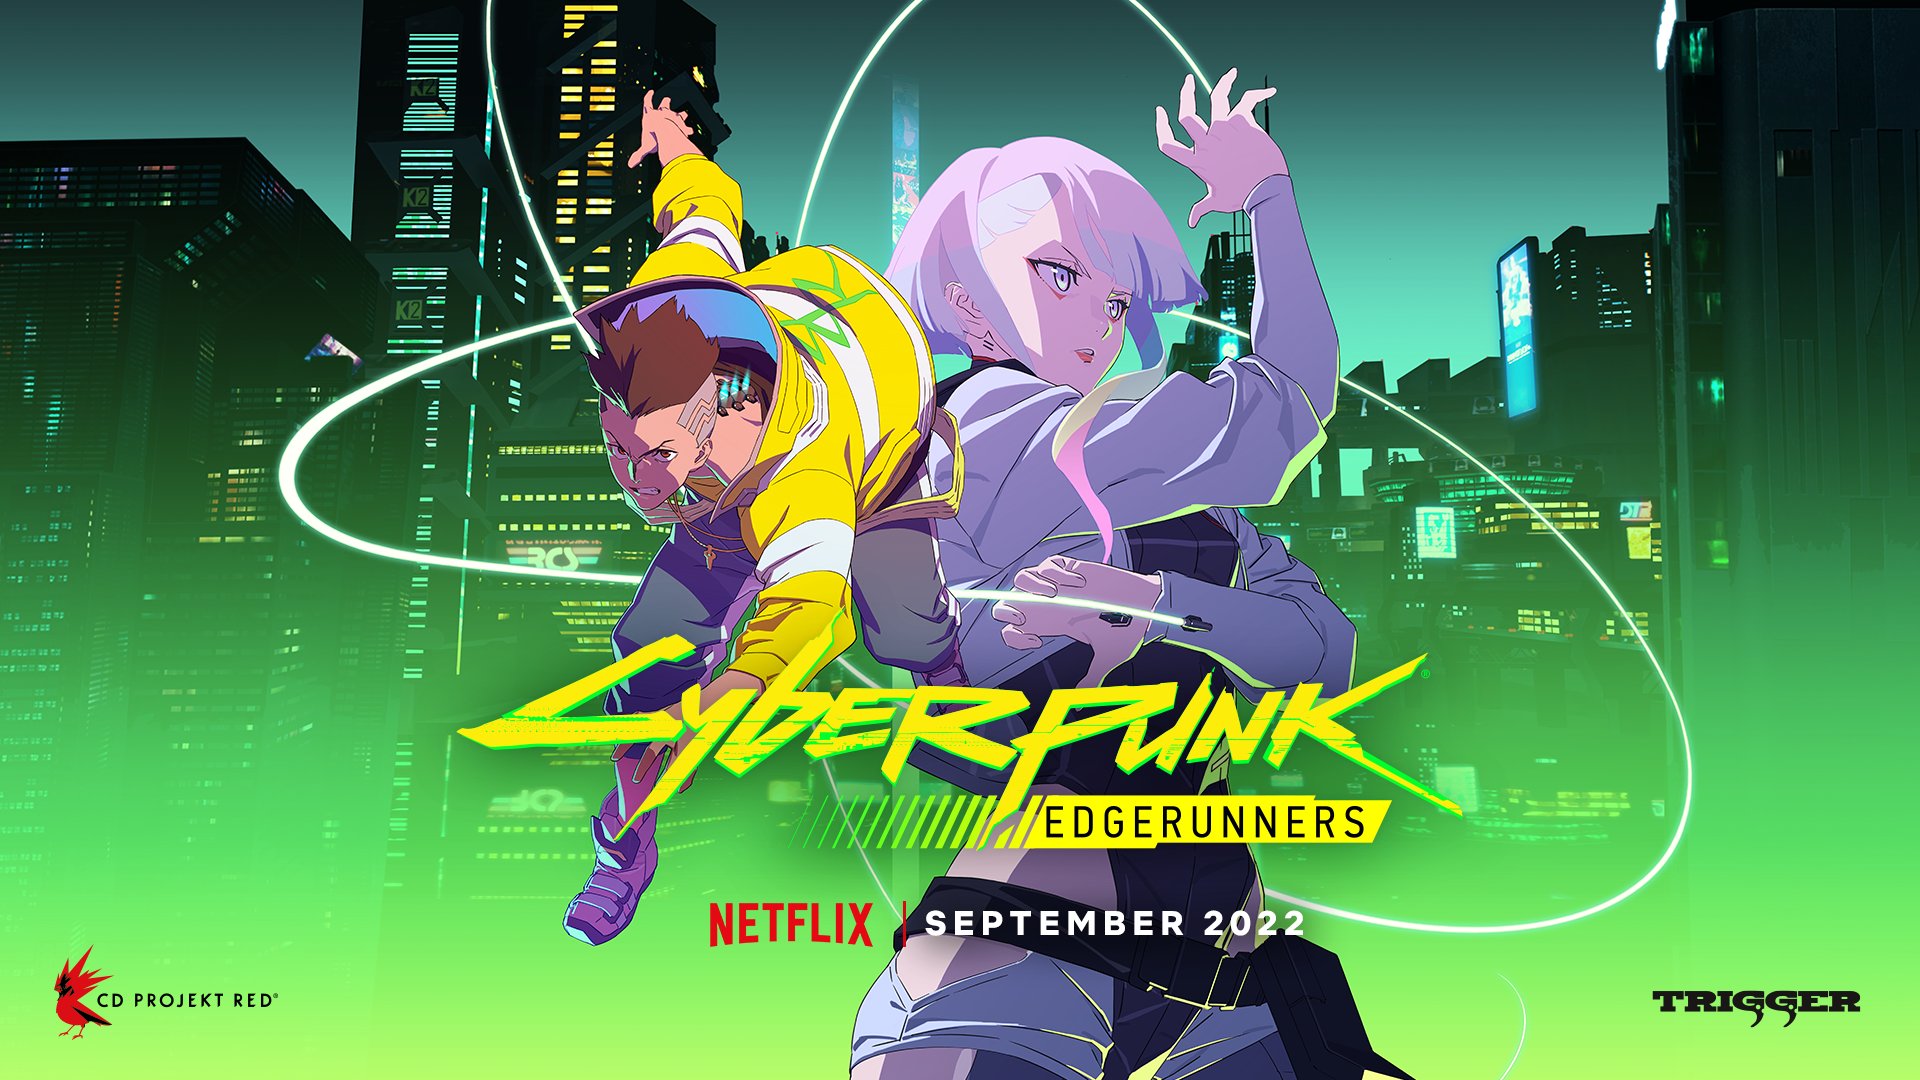 Cyberpunk 2077: Edgerunners, An Original, 10 Episode Anime Series From CD PROJEKT RED And Studio Trigger Is Coming To Netflix In September 2022. Tell Your Chooms! More Updates Hittin' The